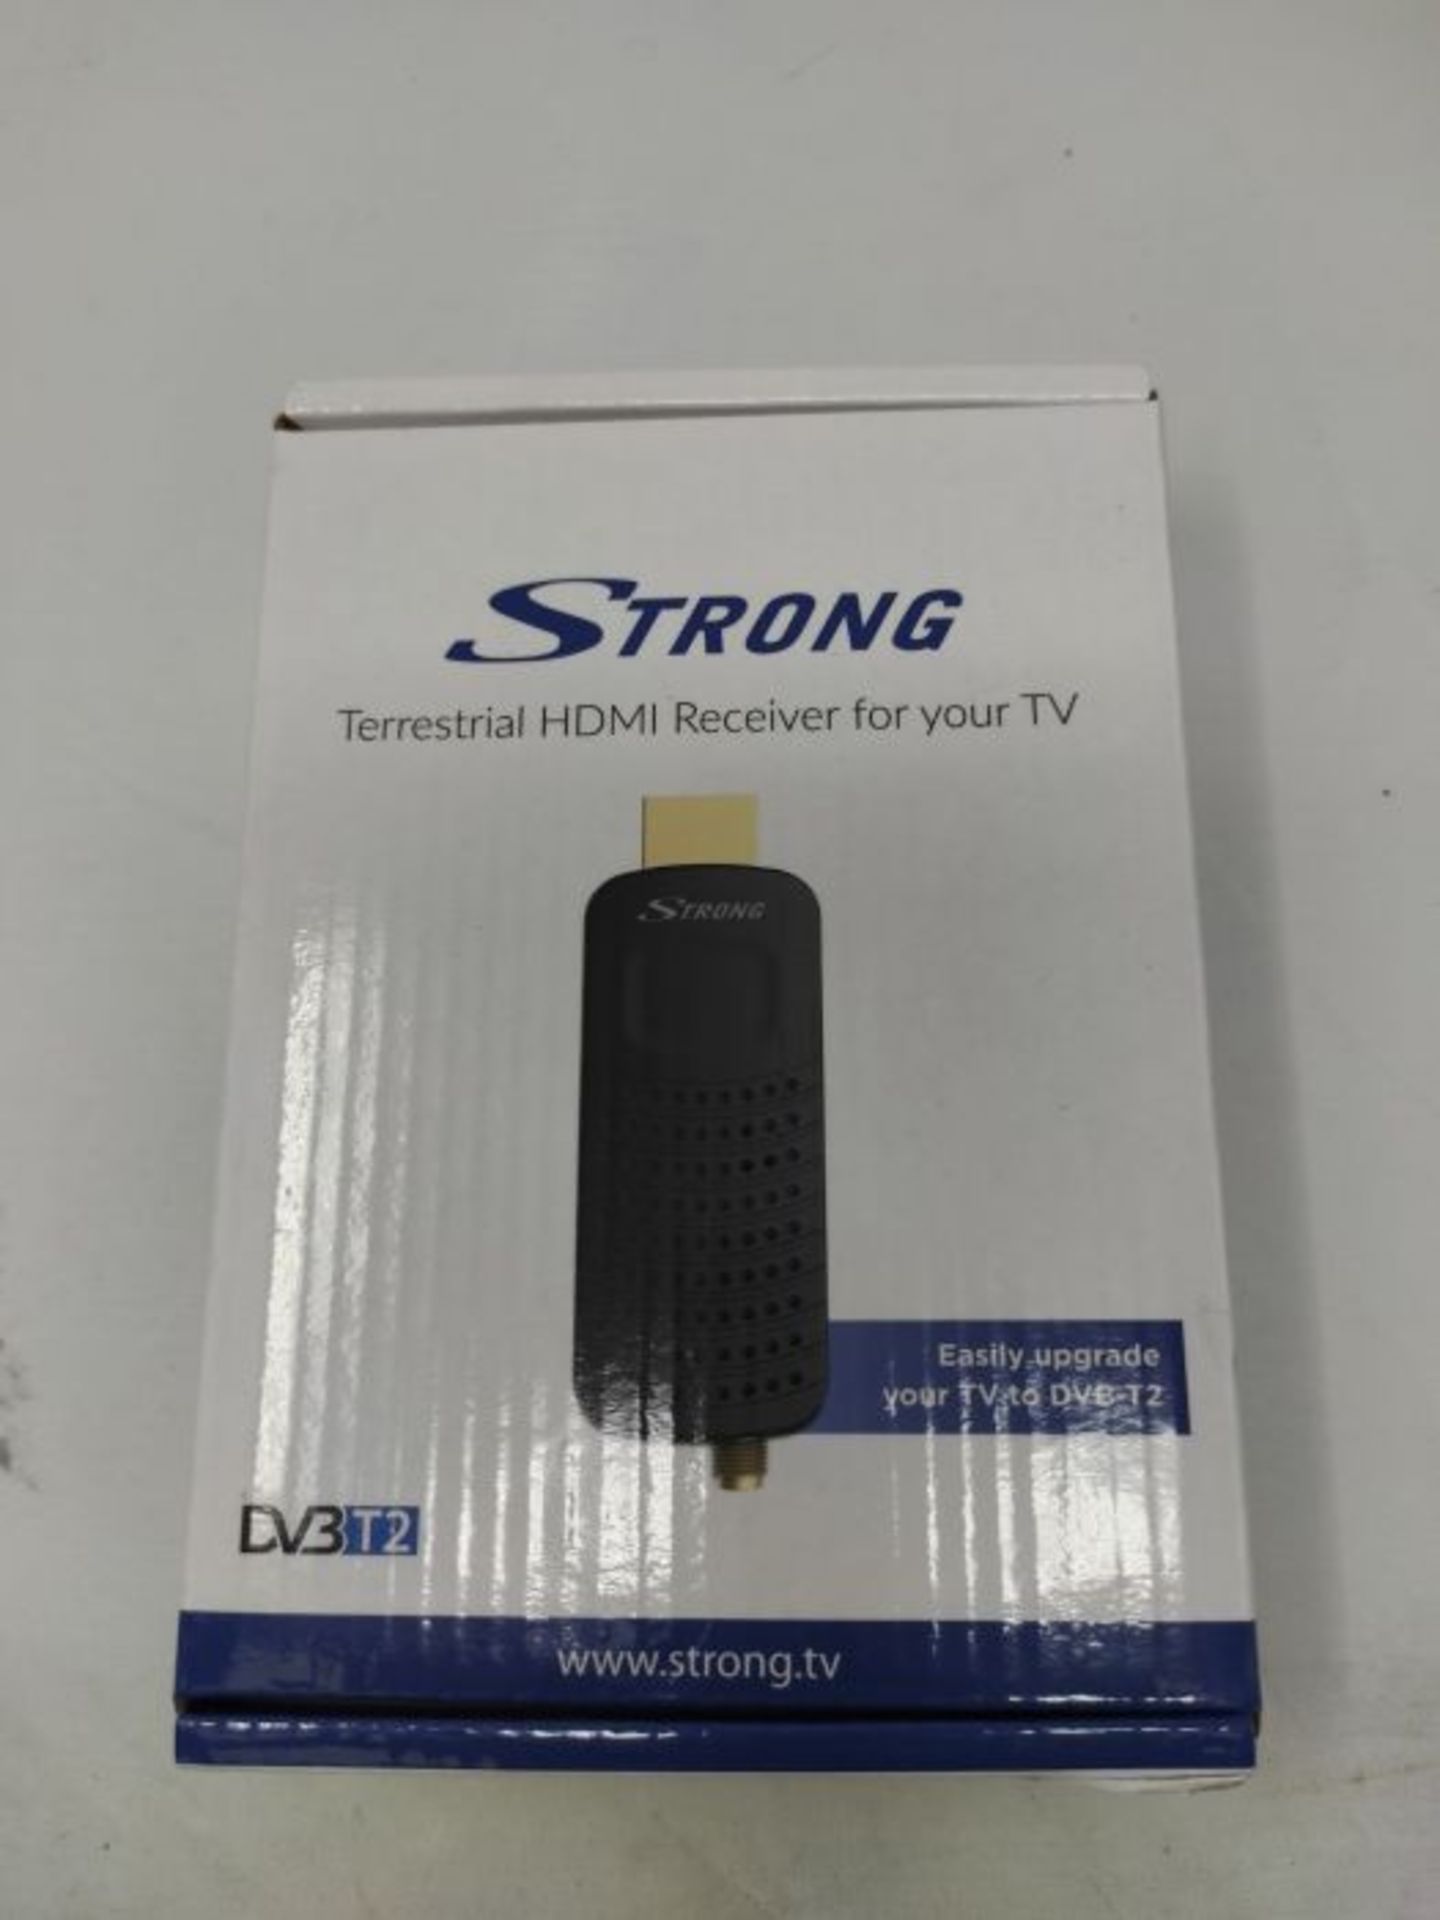 Strong SRT82 Full HD DVB-T2 HDMI Stick - Compatible with Hevc265 - TV Receiver/Tuner w - Image 2 of 3